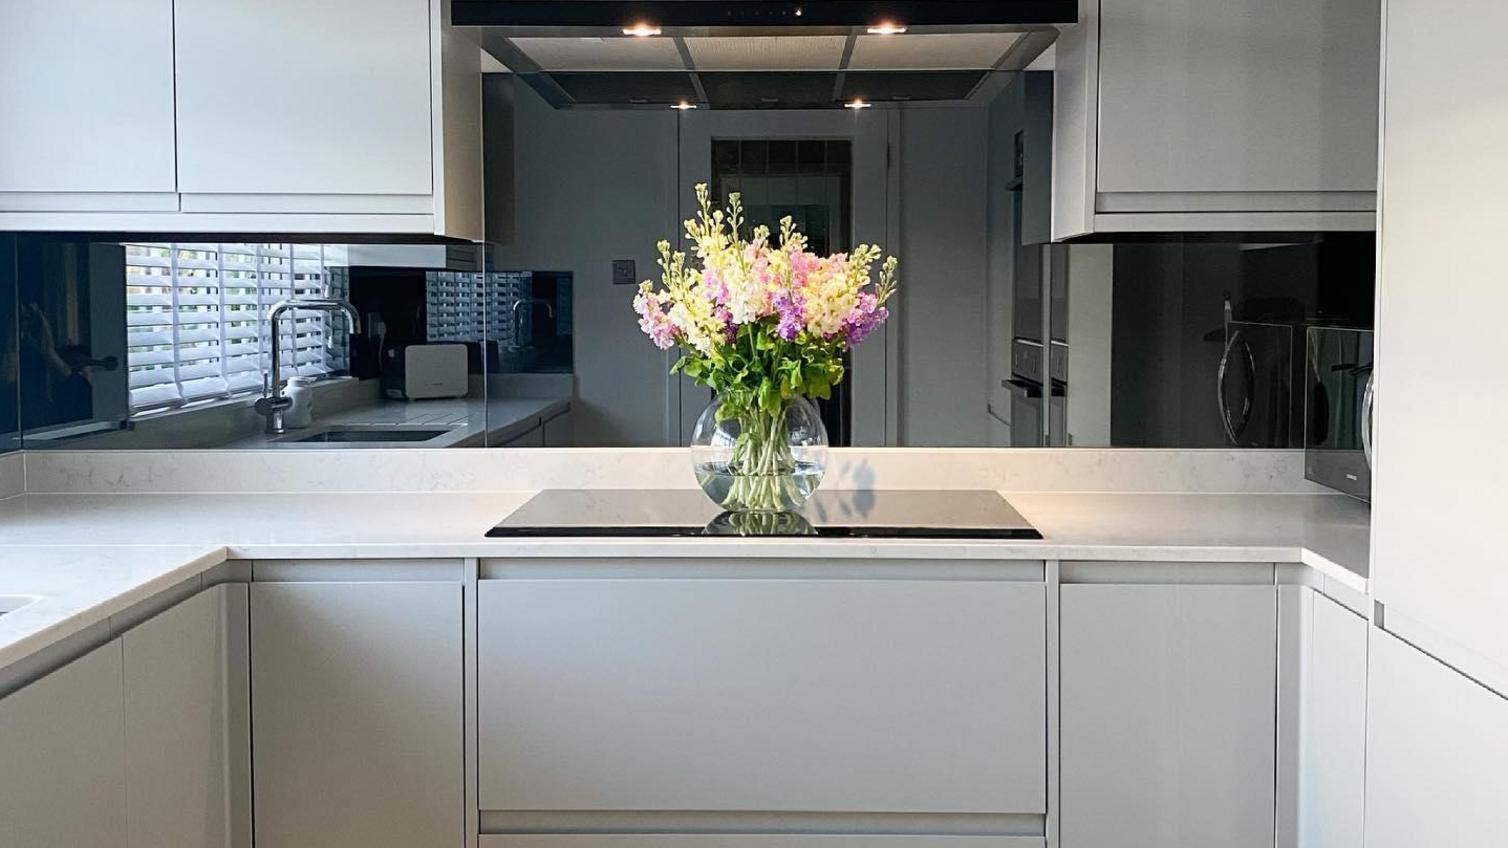 A modern budget kitchen idea using gloss grey integrated handle kitchen doors, white worktops, and LED plinth lighting.